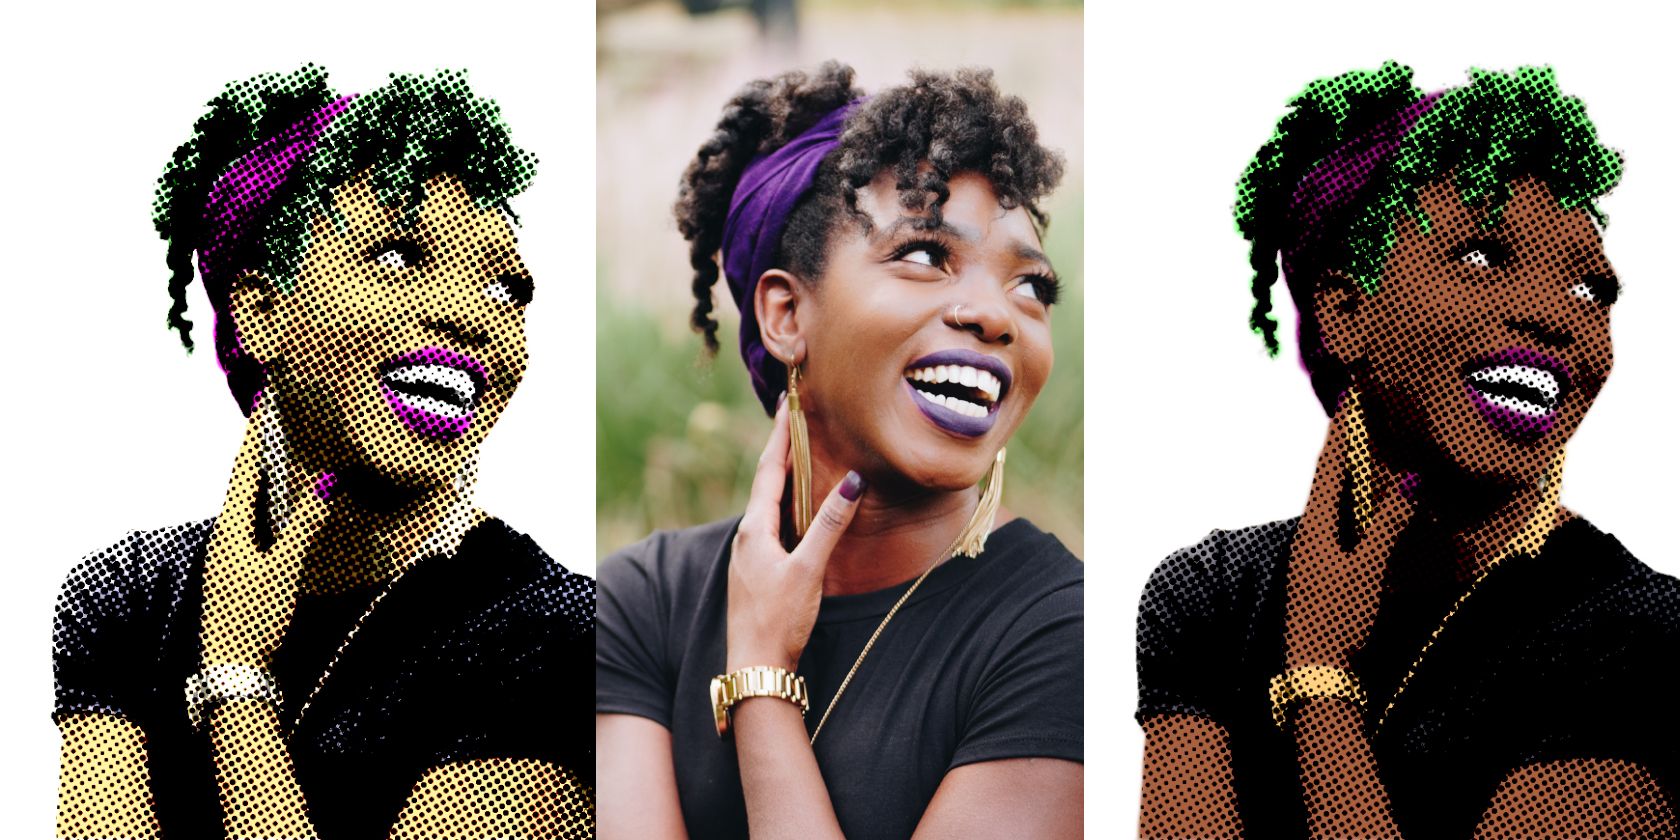 How to Turn a Portrait Into Pop Art Using Photoshop